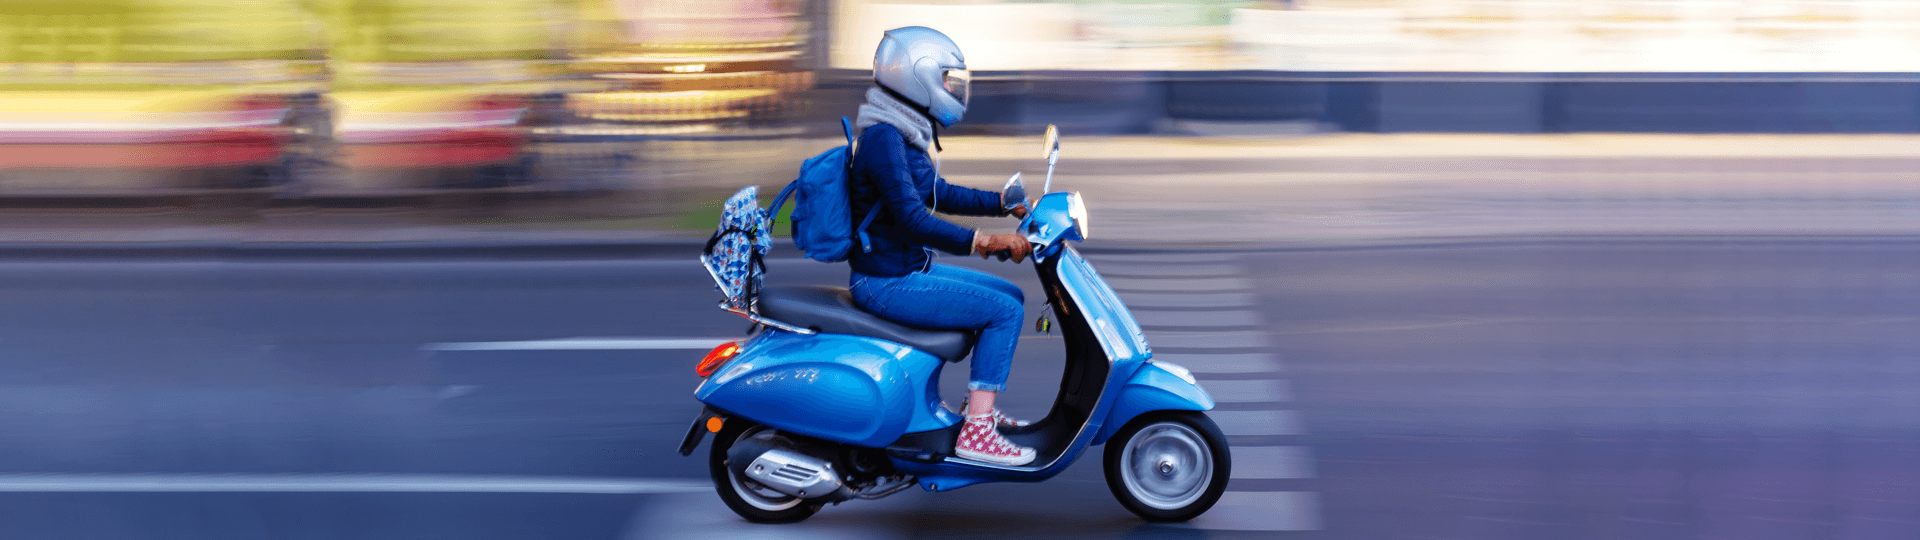 moped-strasse